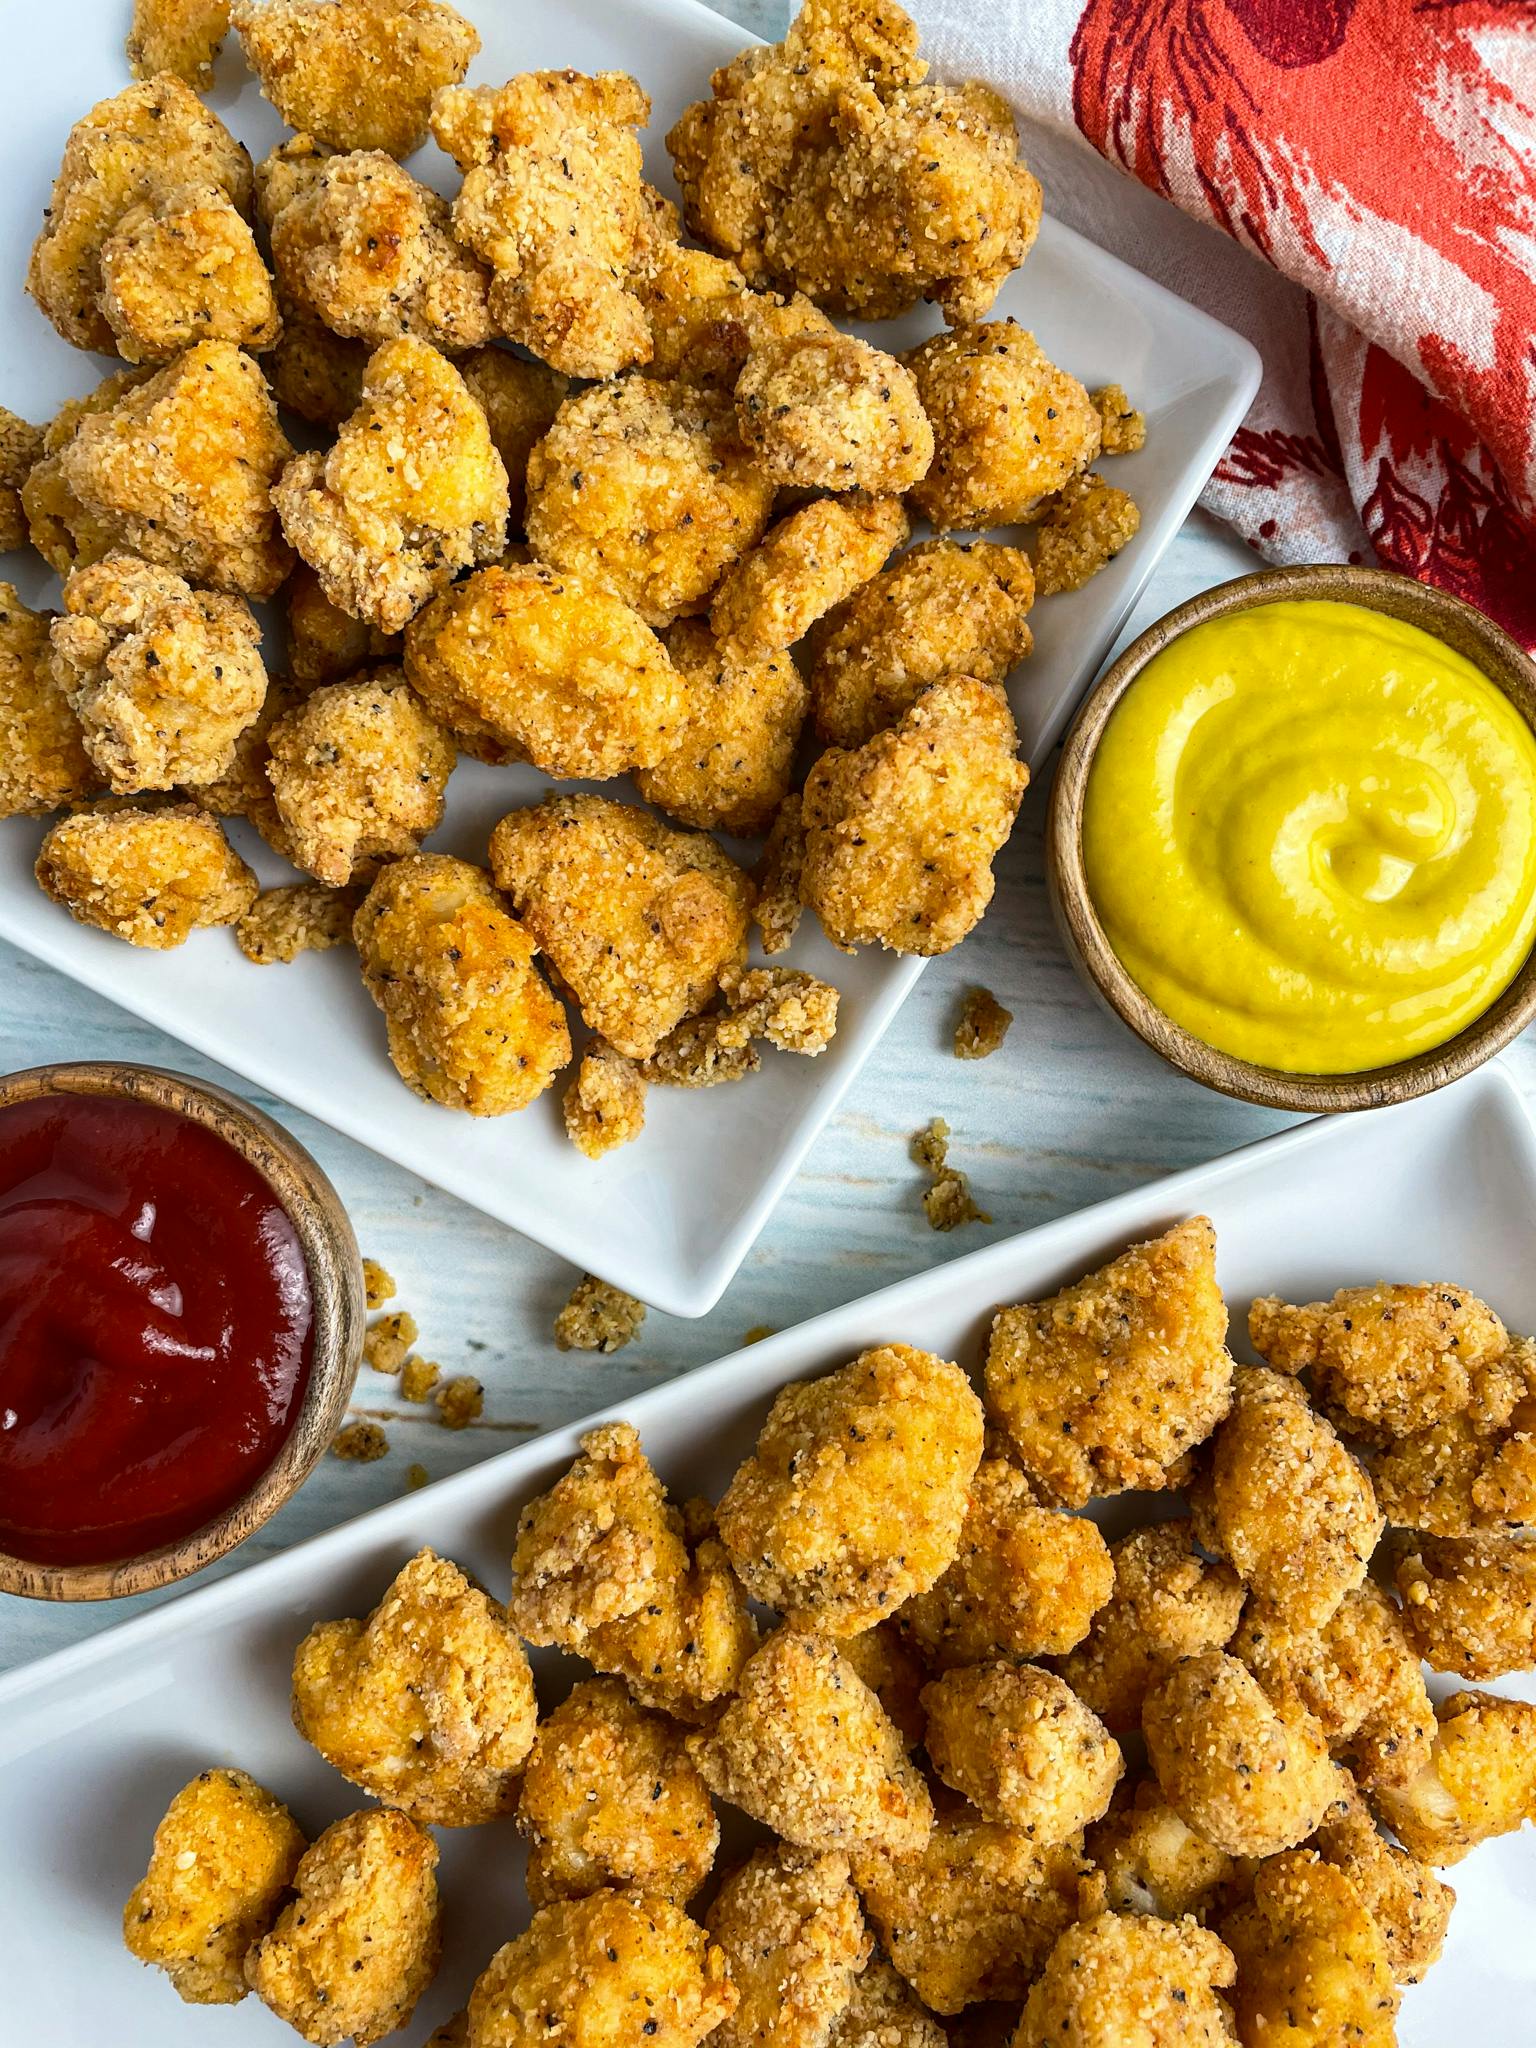 Popcorn chicken on a white plate next to ketchup and mustard.